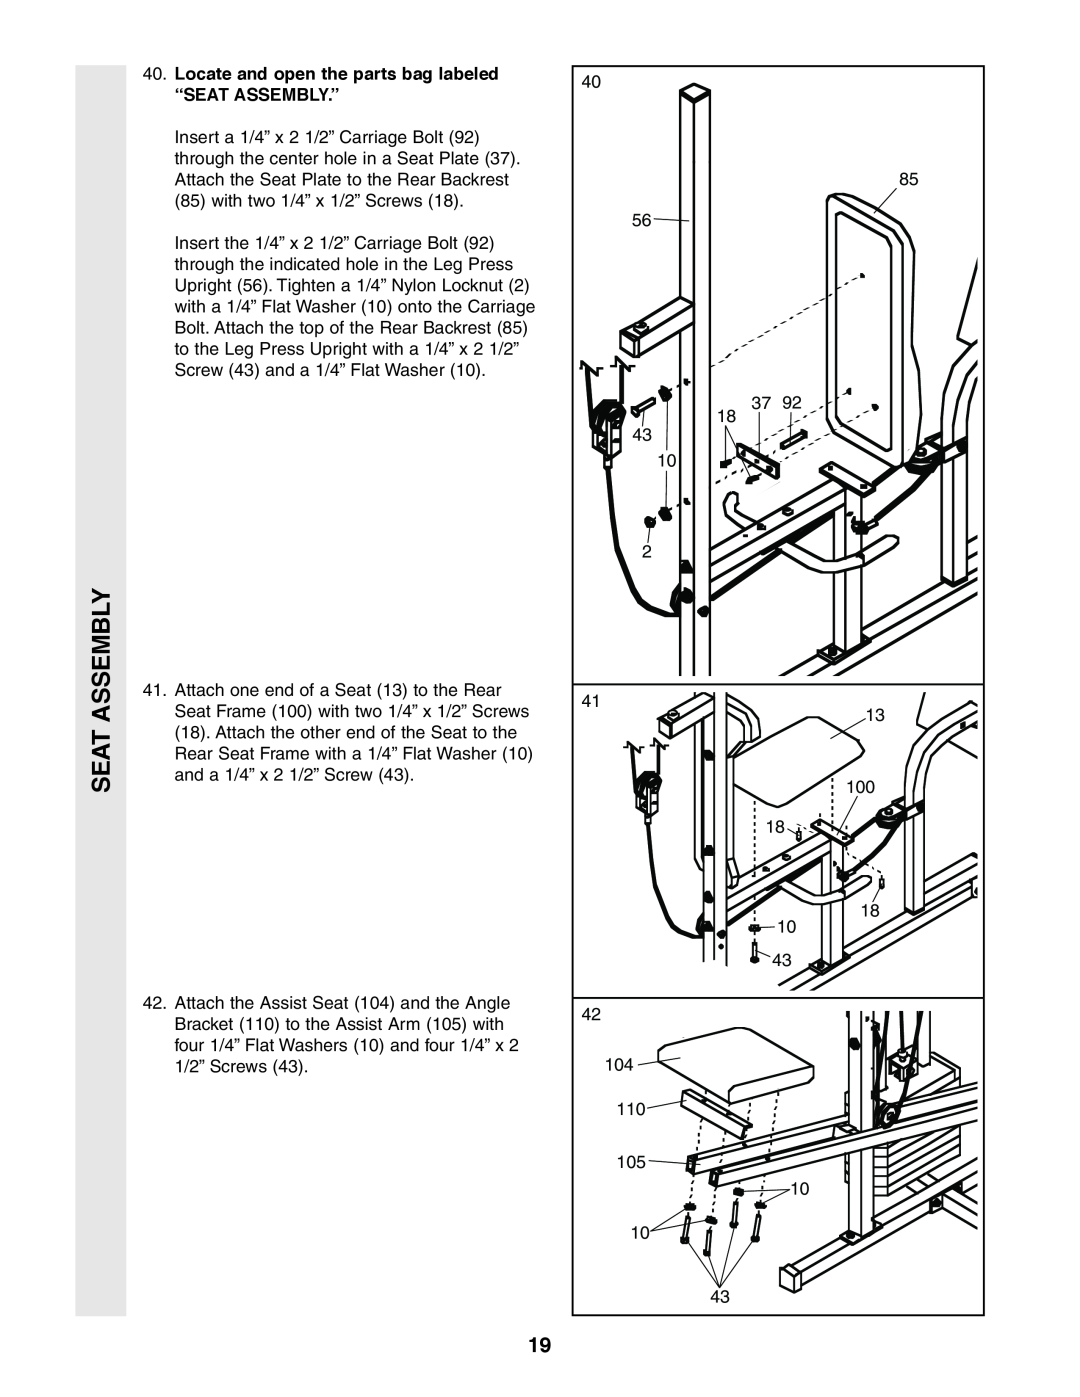 Weider 831.159380 user manual Seat Assembly, Locate and open the parts bag labeled “SEAT ASSEMBLY.” 